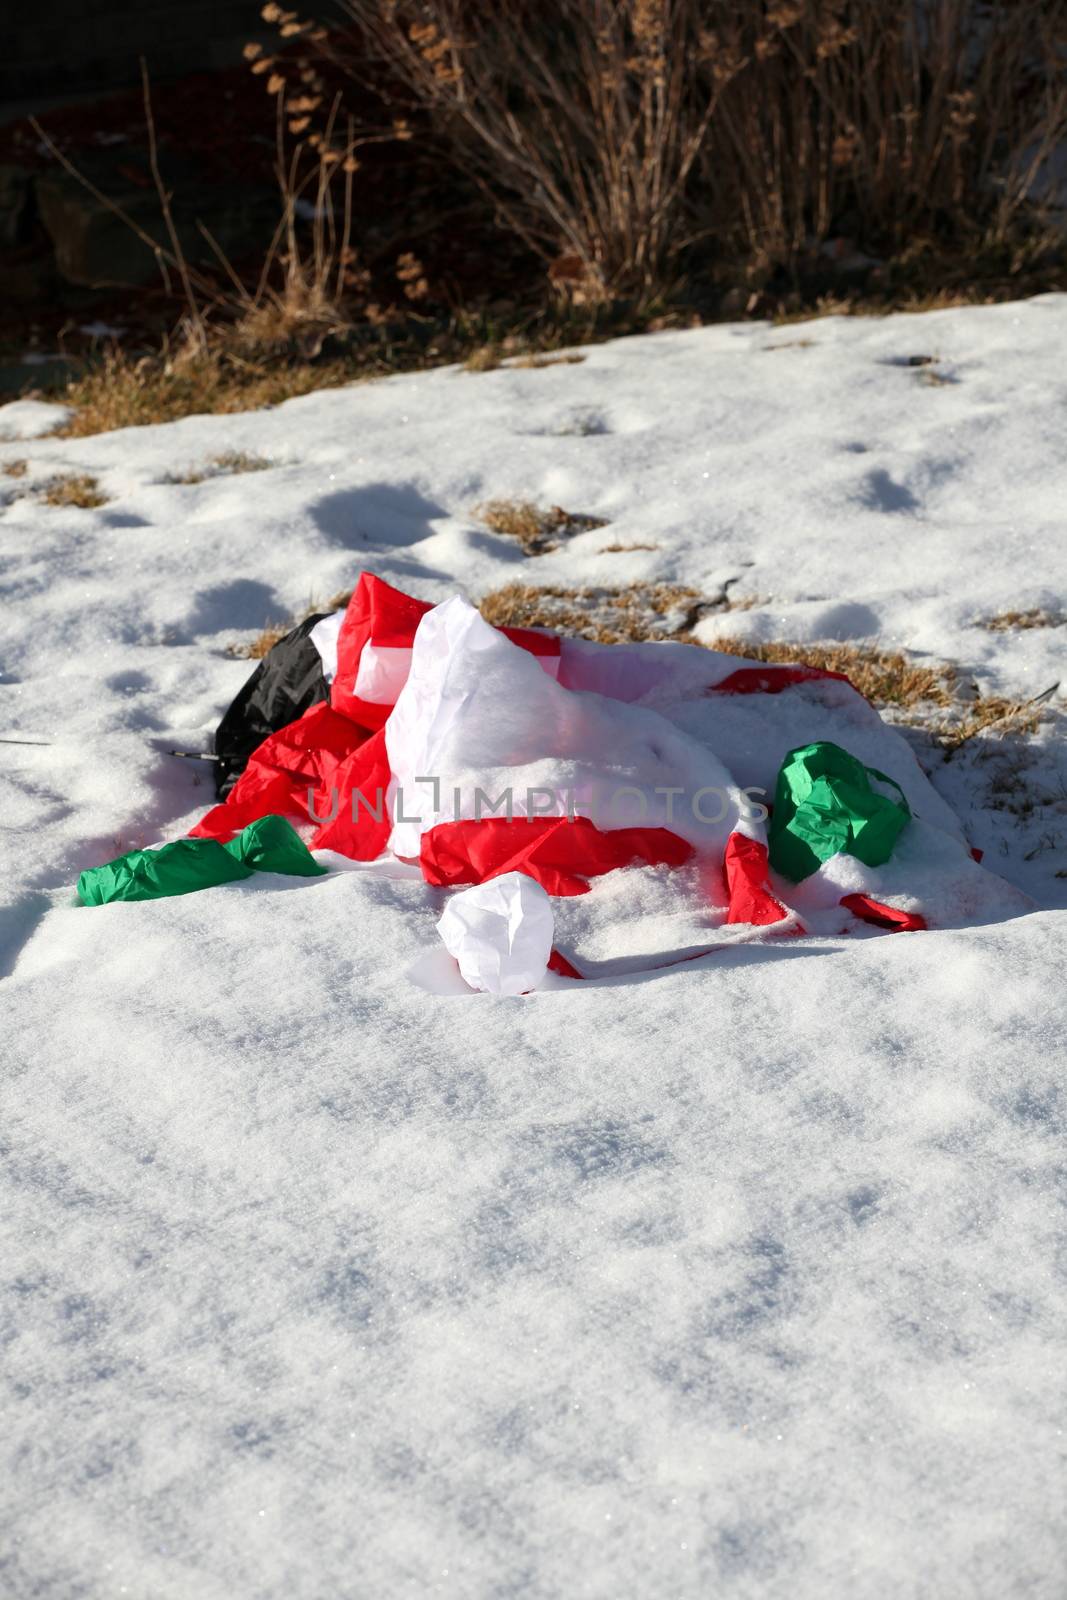 Santa claus collapsed in the winter snow.